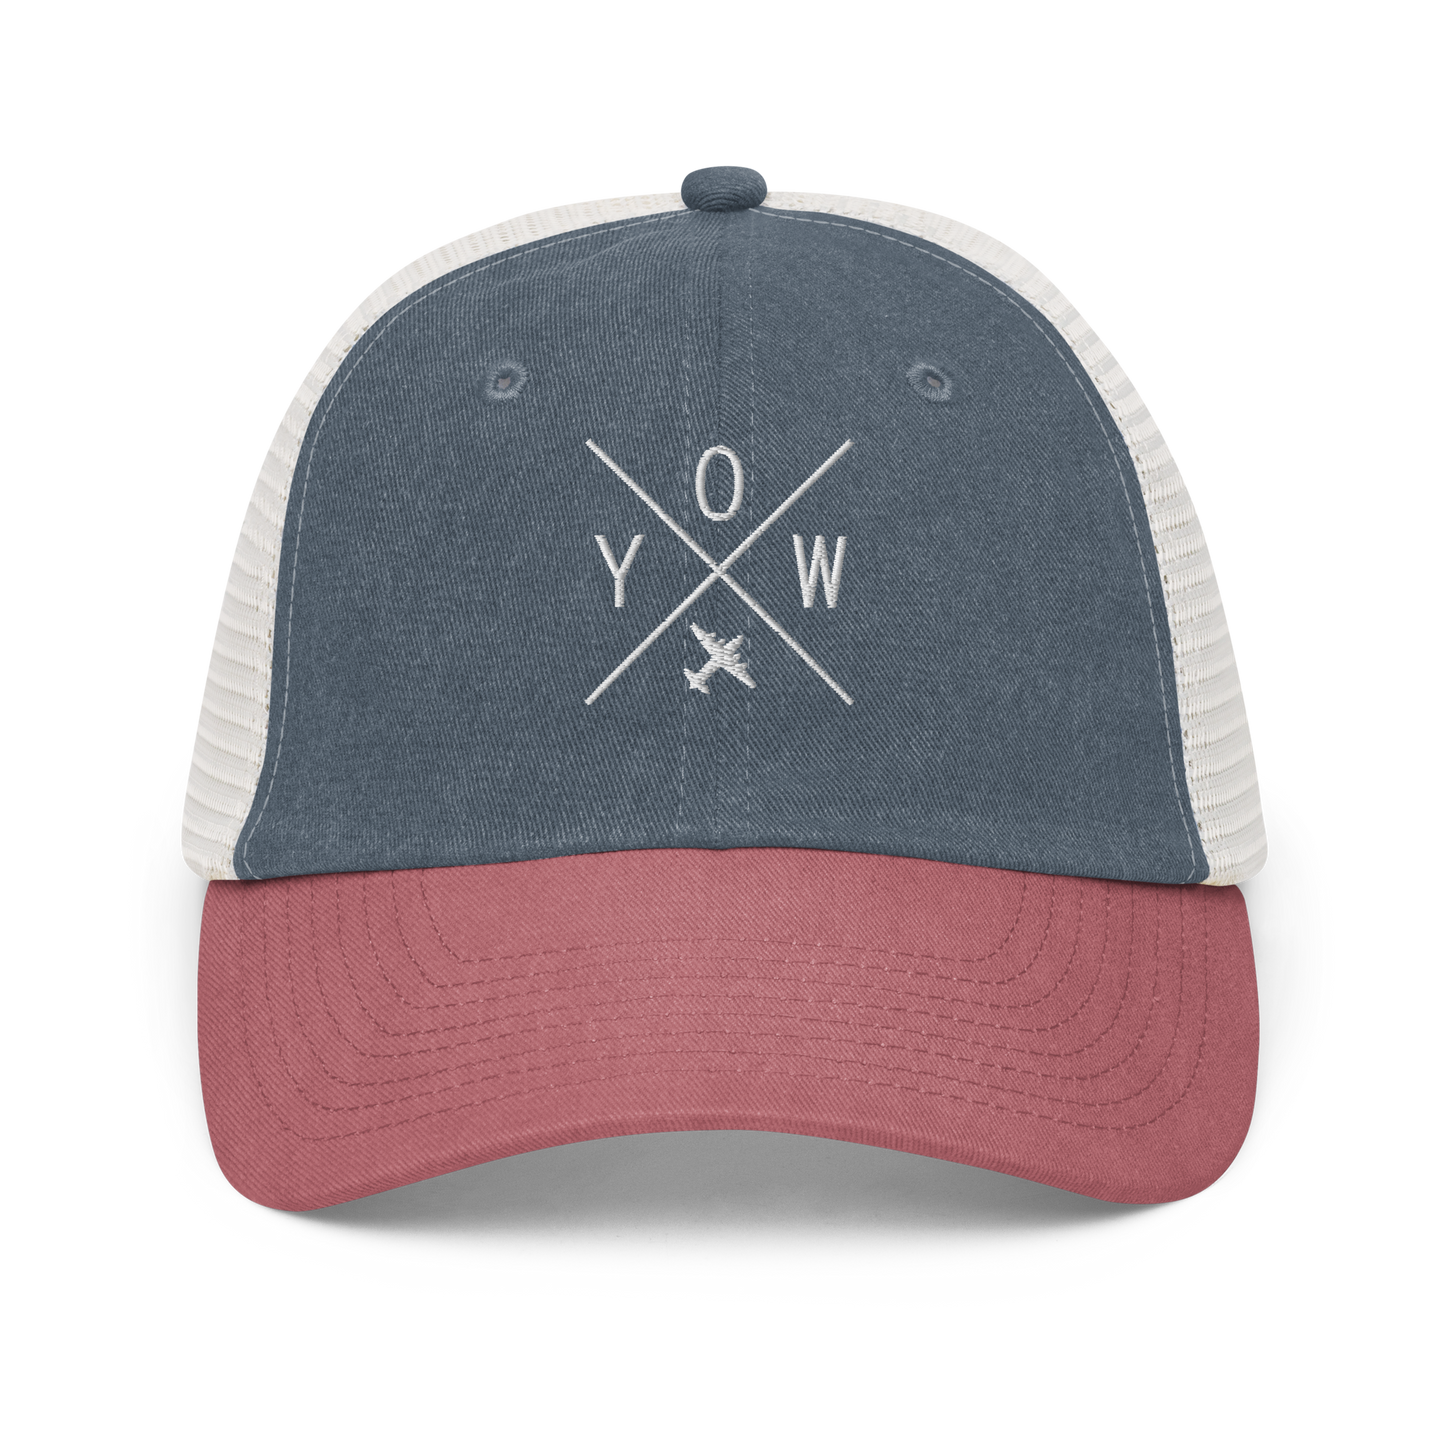 YHM Designs - YOW Ottawa Pigment-Dyed Trucker Cap - Crossed-X Design with Airport Code and Vintage Propliner - White Embroidery - Image 12